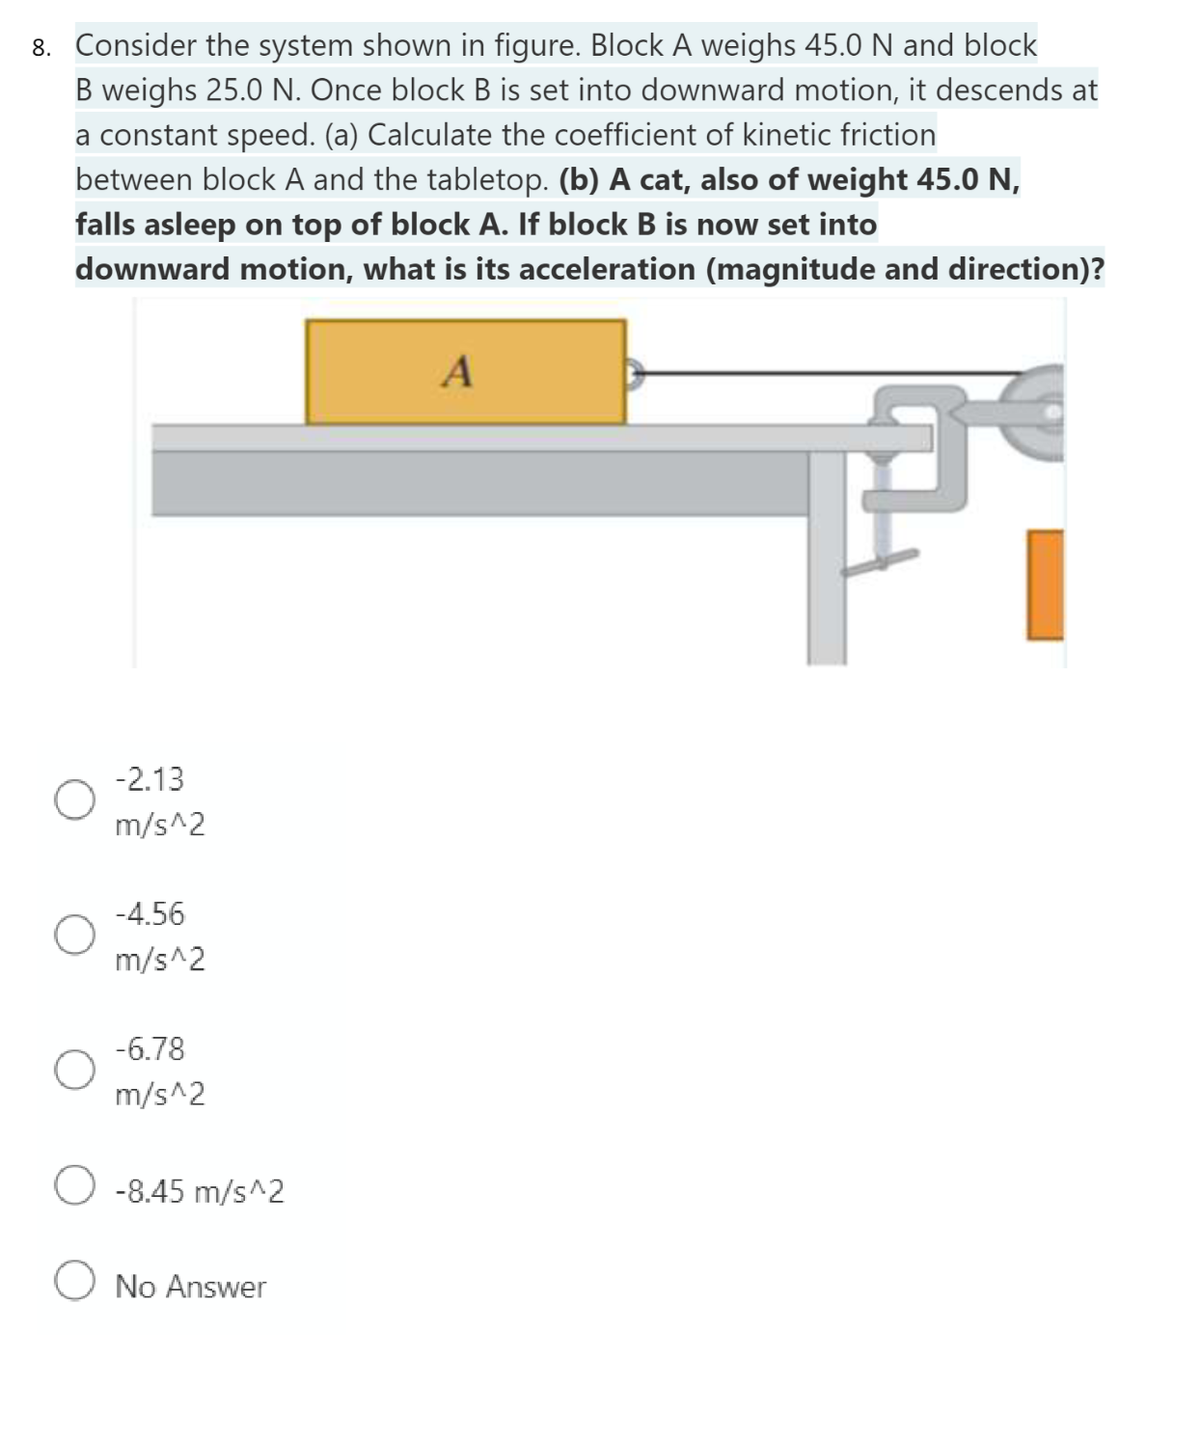 8. Consider the system shown in figure. Block A weighs 45.0 N and block
B weighs 25.0 N. Once block B is set into downward motion, it descends at
a constant speed. (a) Calculate the coefficient of kinetic friction
between block A and the tabletop. (b) A cat, also of weight 45.0 N,
falls asleep on top of block A. If block B is now set into
downward motion, what is its acceleration (magnitude and direction)?
O
-2.13
m/s^2
-4.56
m/s^2
-6.78
m/s^2
O -8.45 m/s^2
O No Answer
A
F